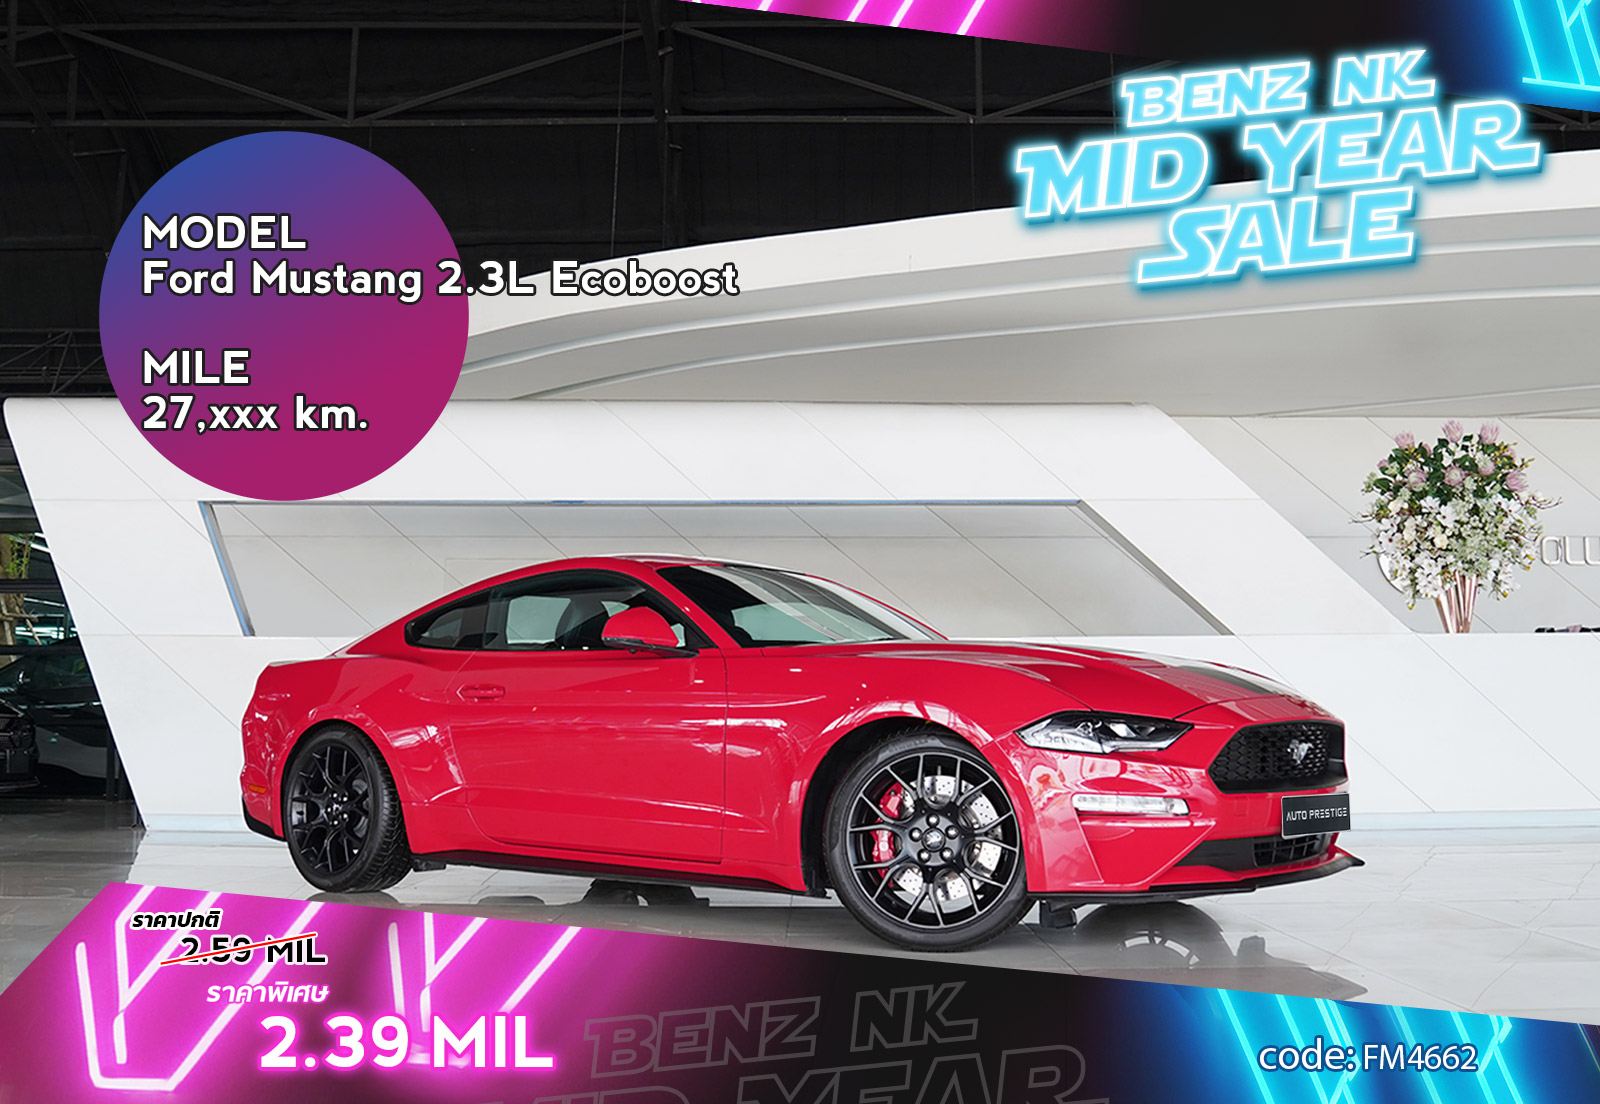 Ford Mustang 2.3L Ecoboost Other Brand